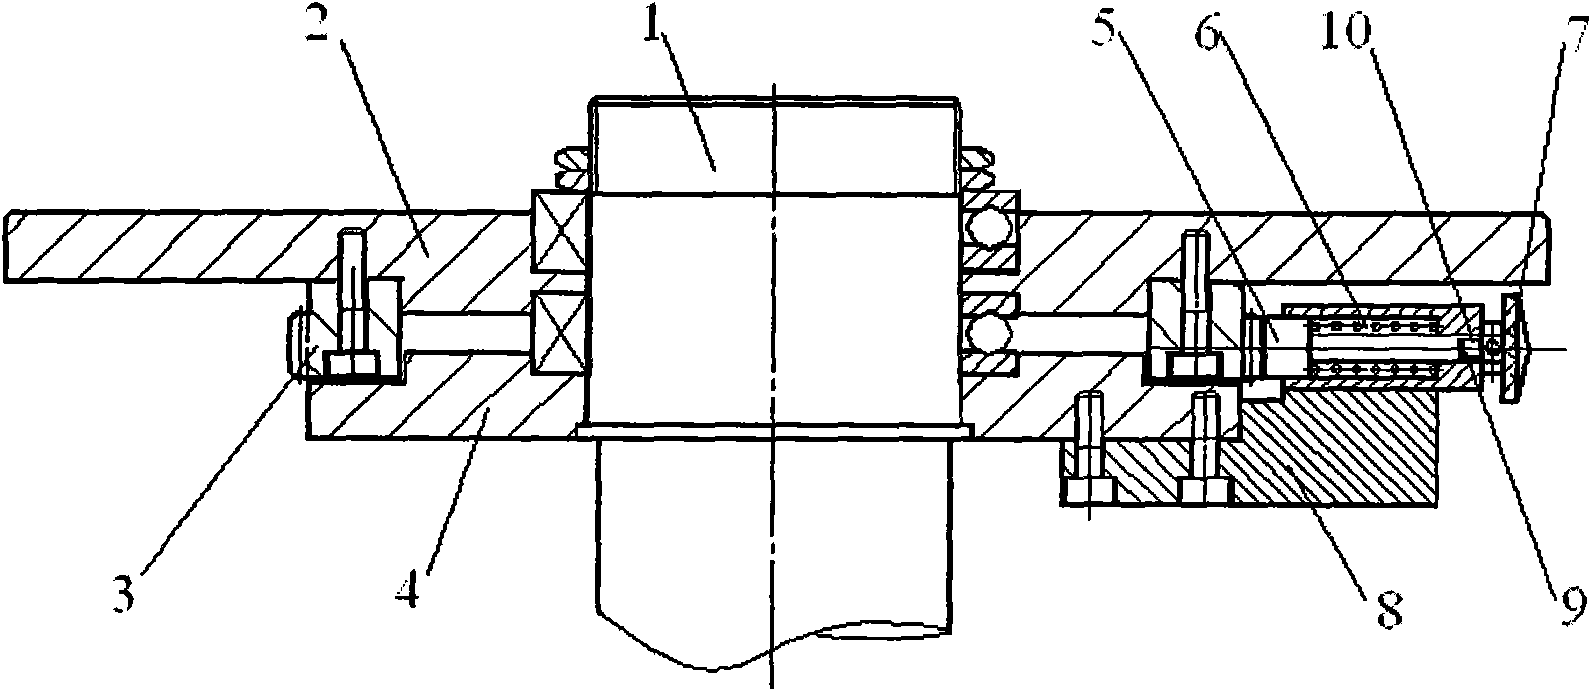 Ratchet mechanism capable of changing direction of rotation